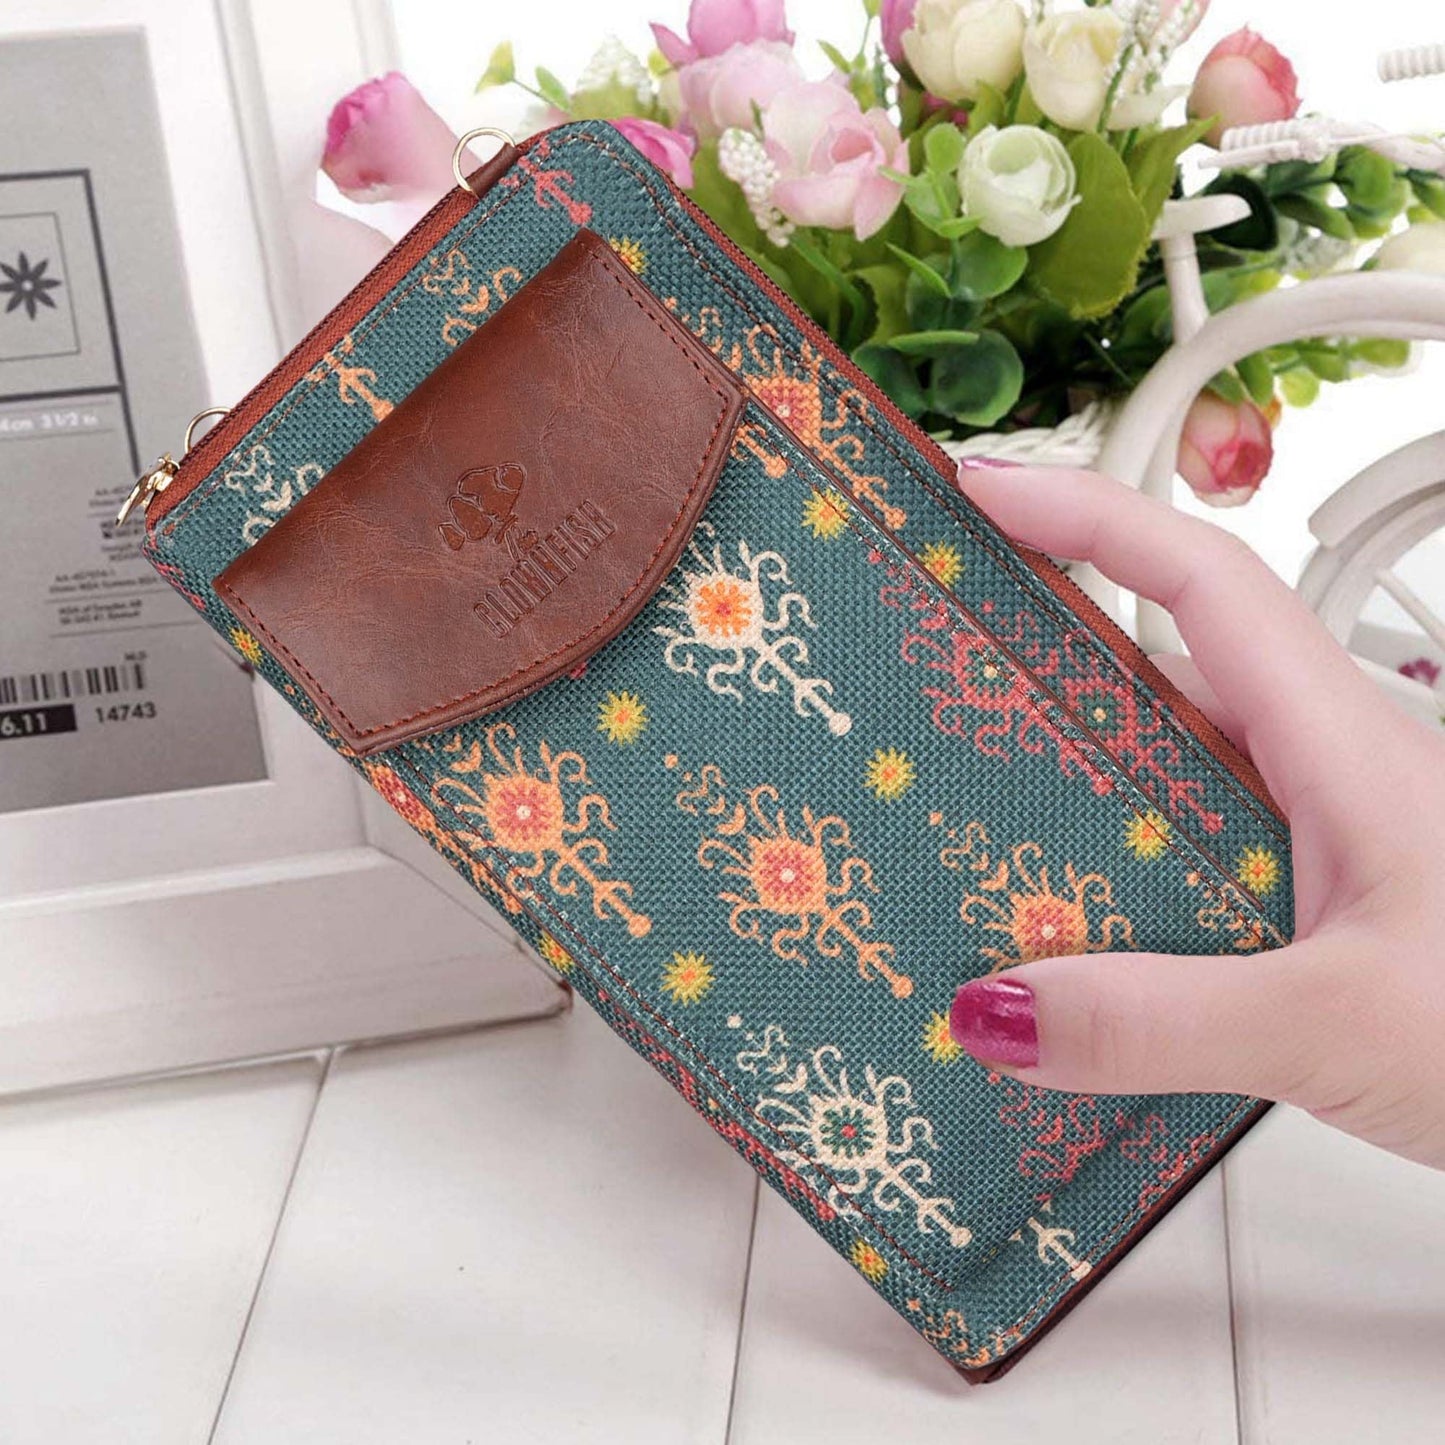 THE CLOWNFISH Fashionista Printed Handicraft Fabric & Vegan Leather Ladies Wallet Sling Bag with Front Mobile Pocket (Green)